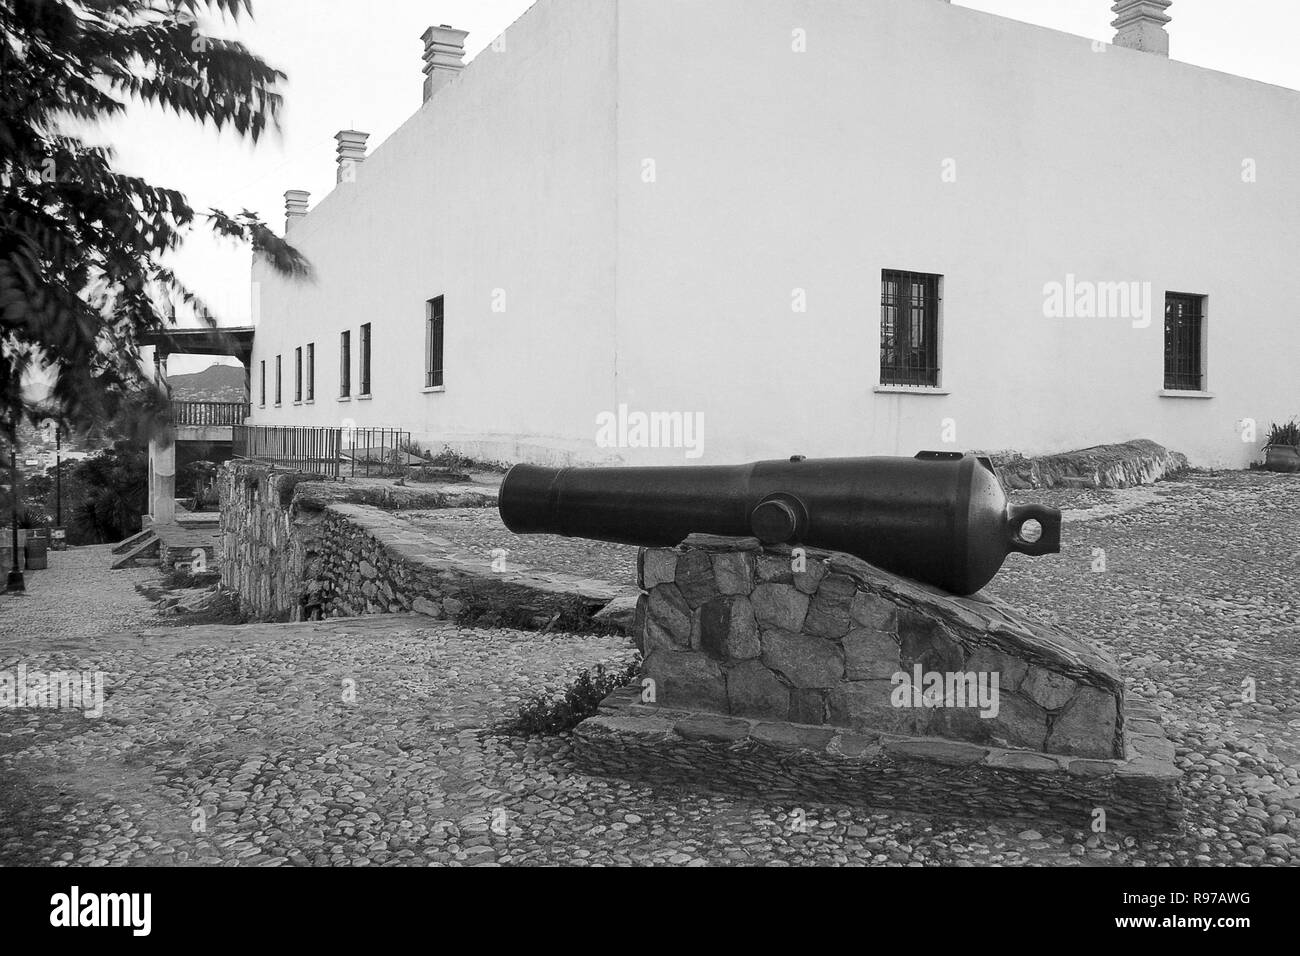 MONTERREY, NL/MEXICO - NOV 20, 2002: Cannon and the Bishop's museum Stock Photo